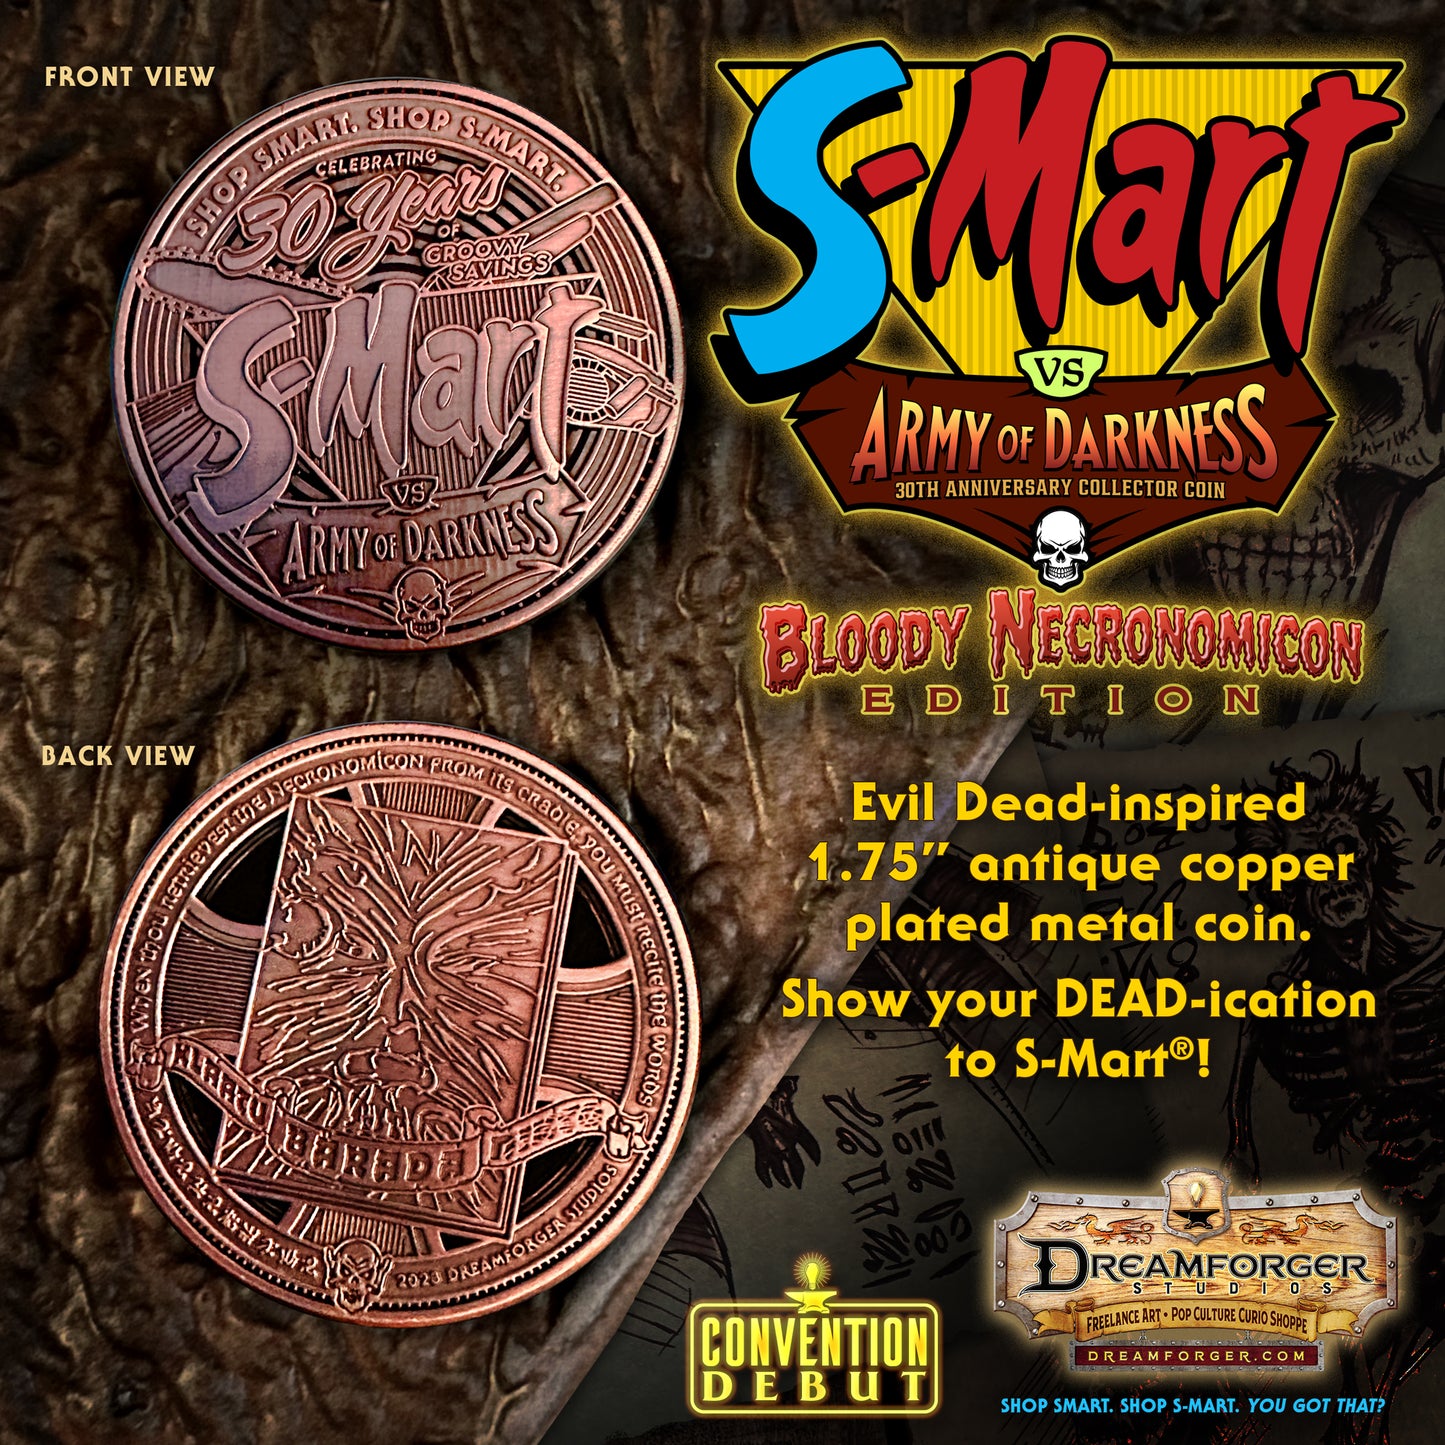 "S-Mart vs. Army of Darkness - Bloody Necronomicon Edition" 30th Anniversary Metal Collector Coin